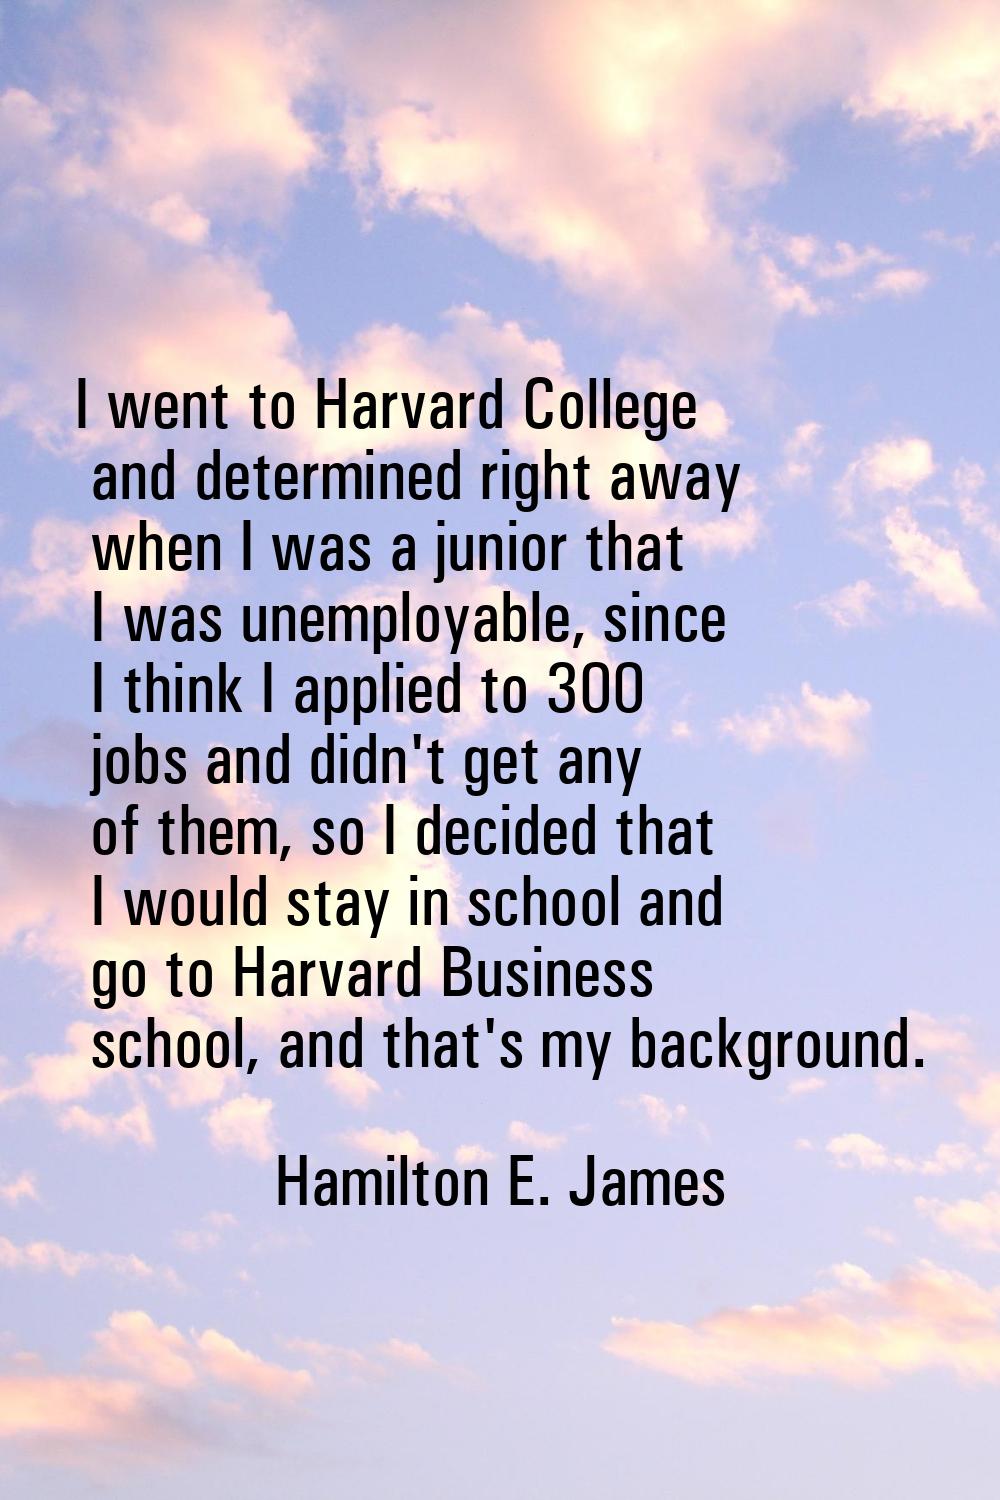 I went to Harvard College and determined right away when I was a junior that I was unemployable, si